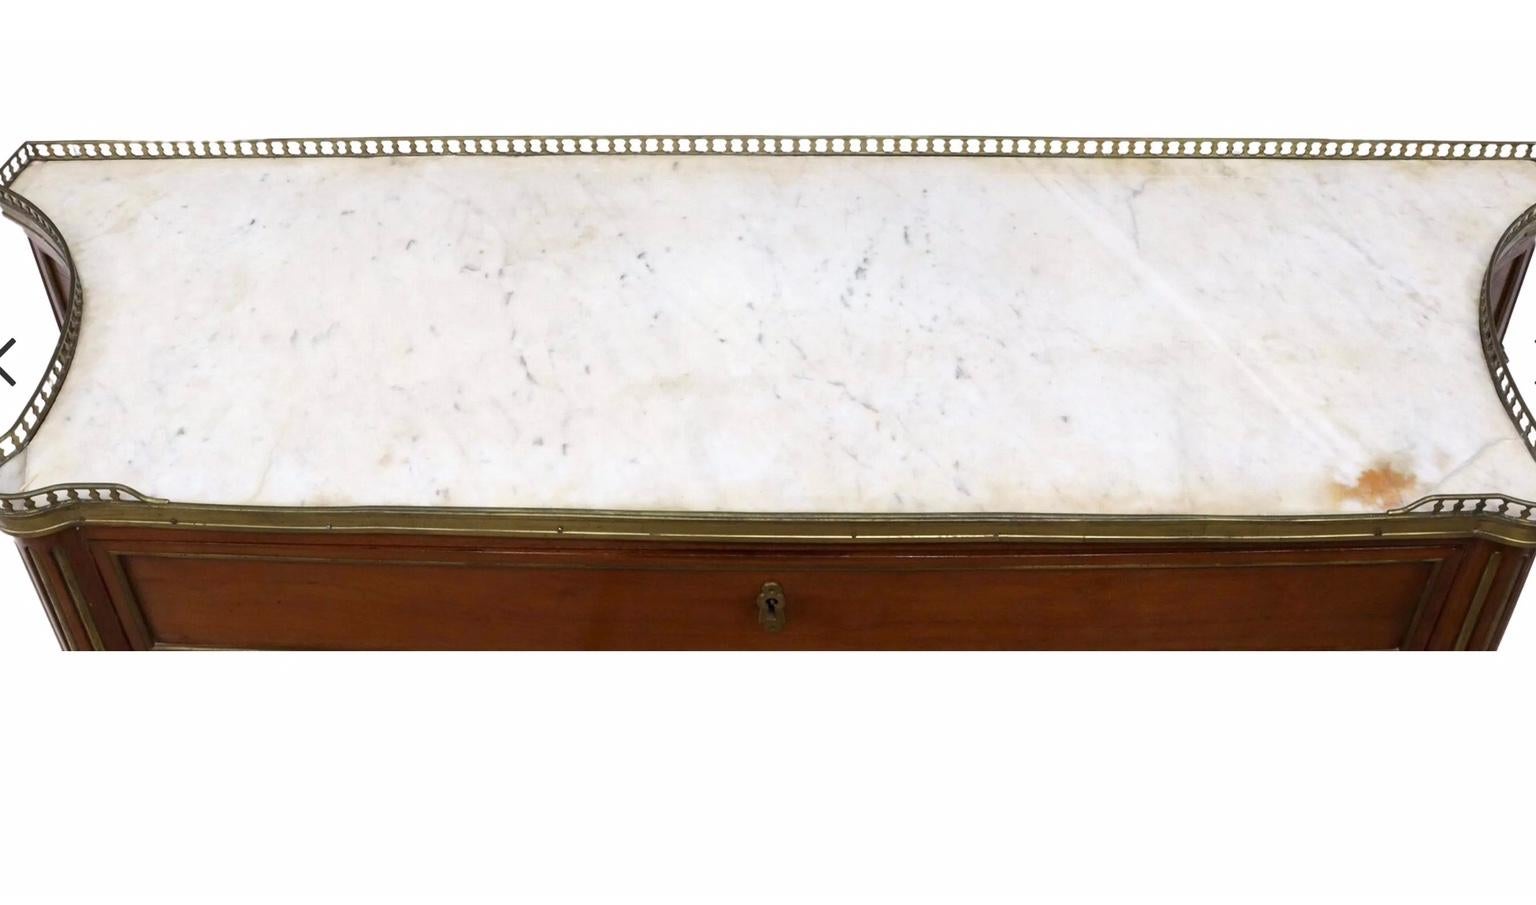 Marble Louis XVI Style Mahogany Desserte Console Sideboard or Server